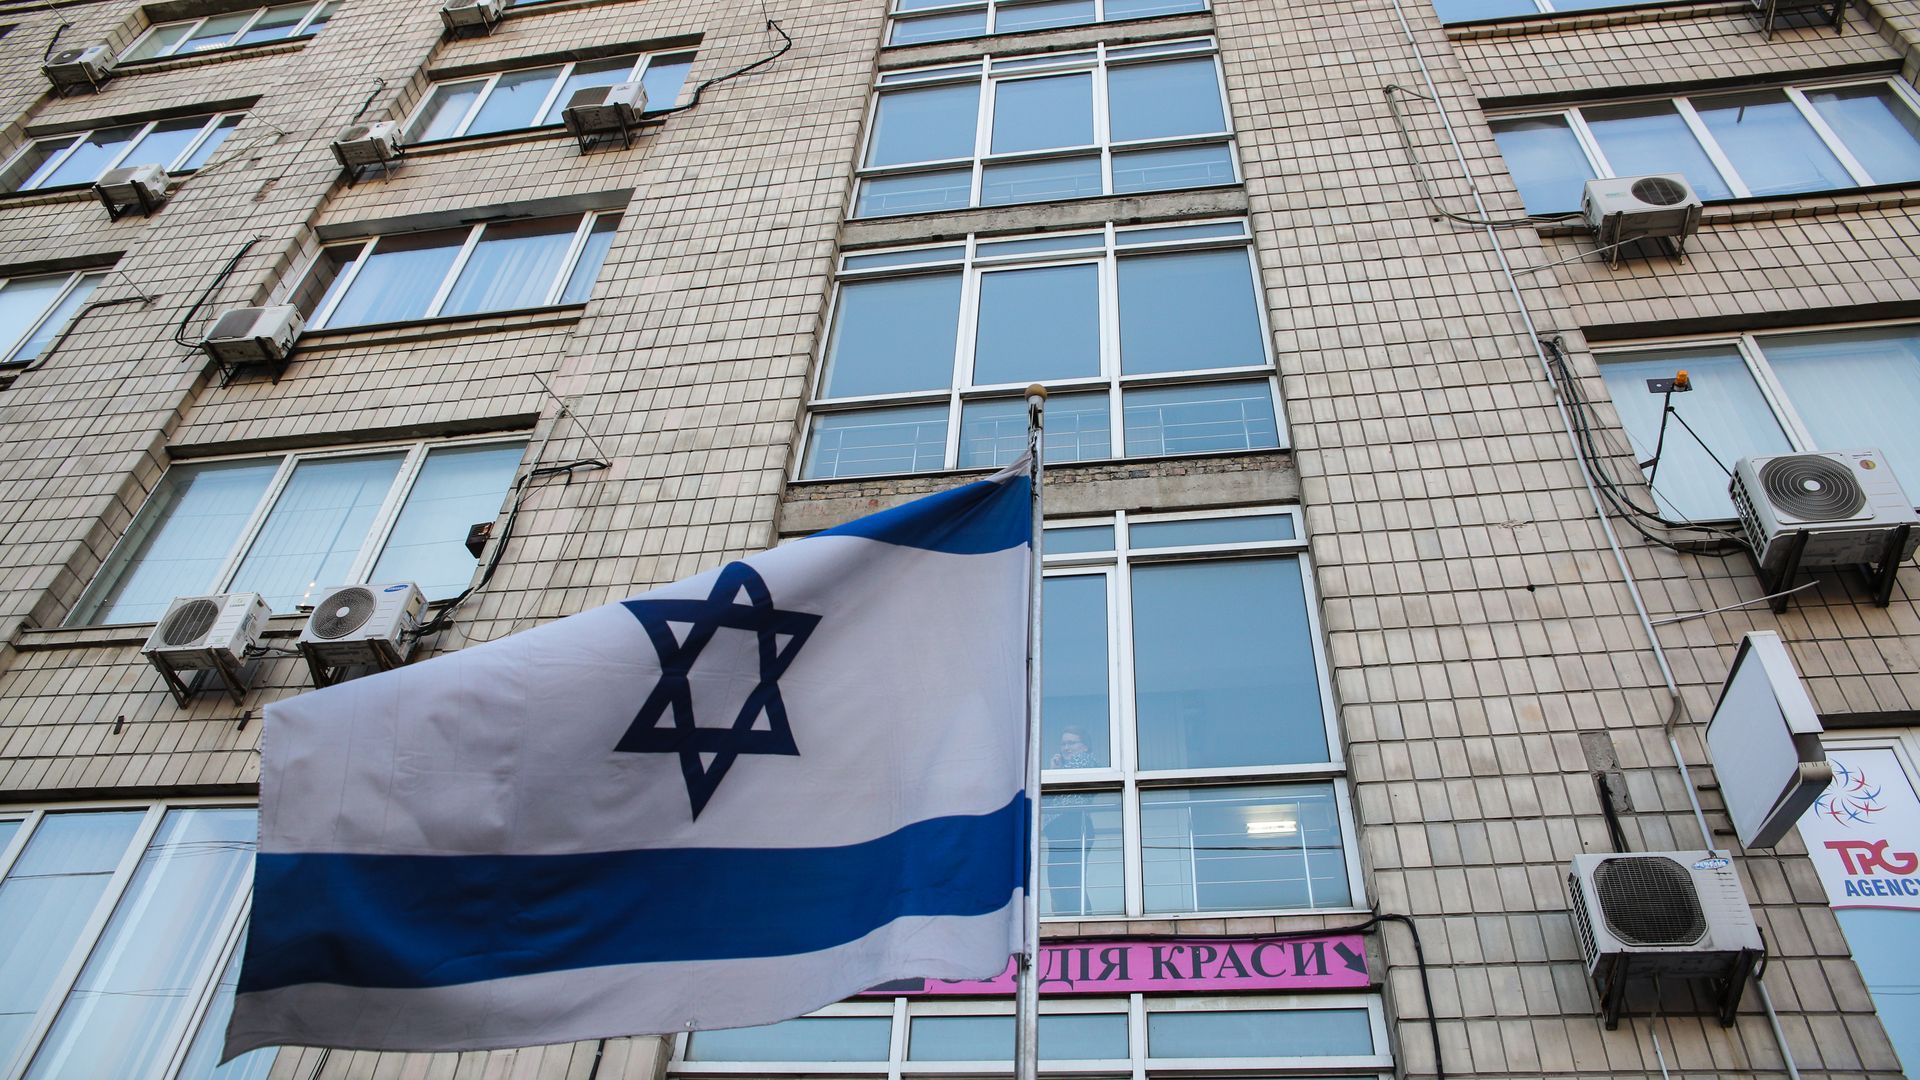 Israeli flag is seen in front of the building where Israeli Embassy is located in Kyiv, Ukraine, in October 2019. Photo: Sergii Kharchenko/NurPhoto via Getty Images